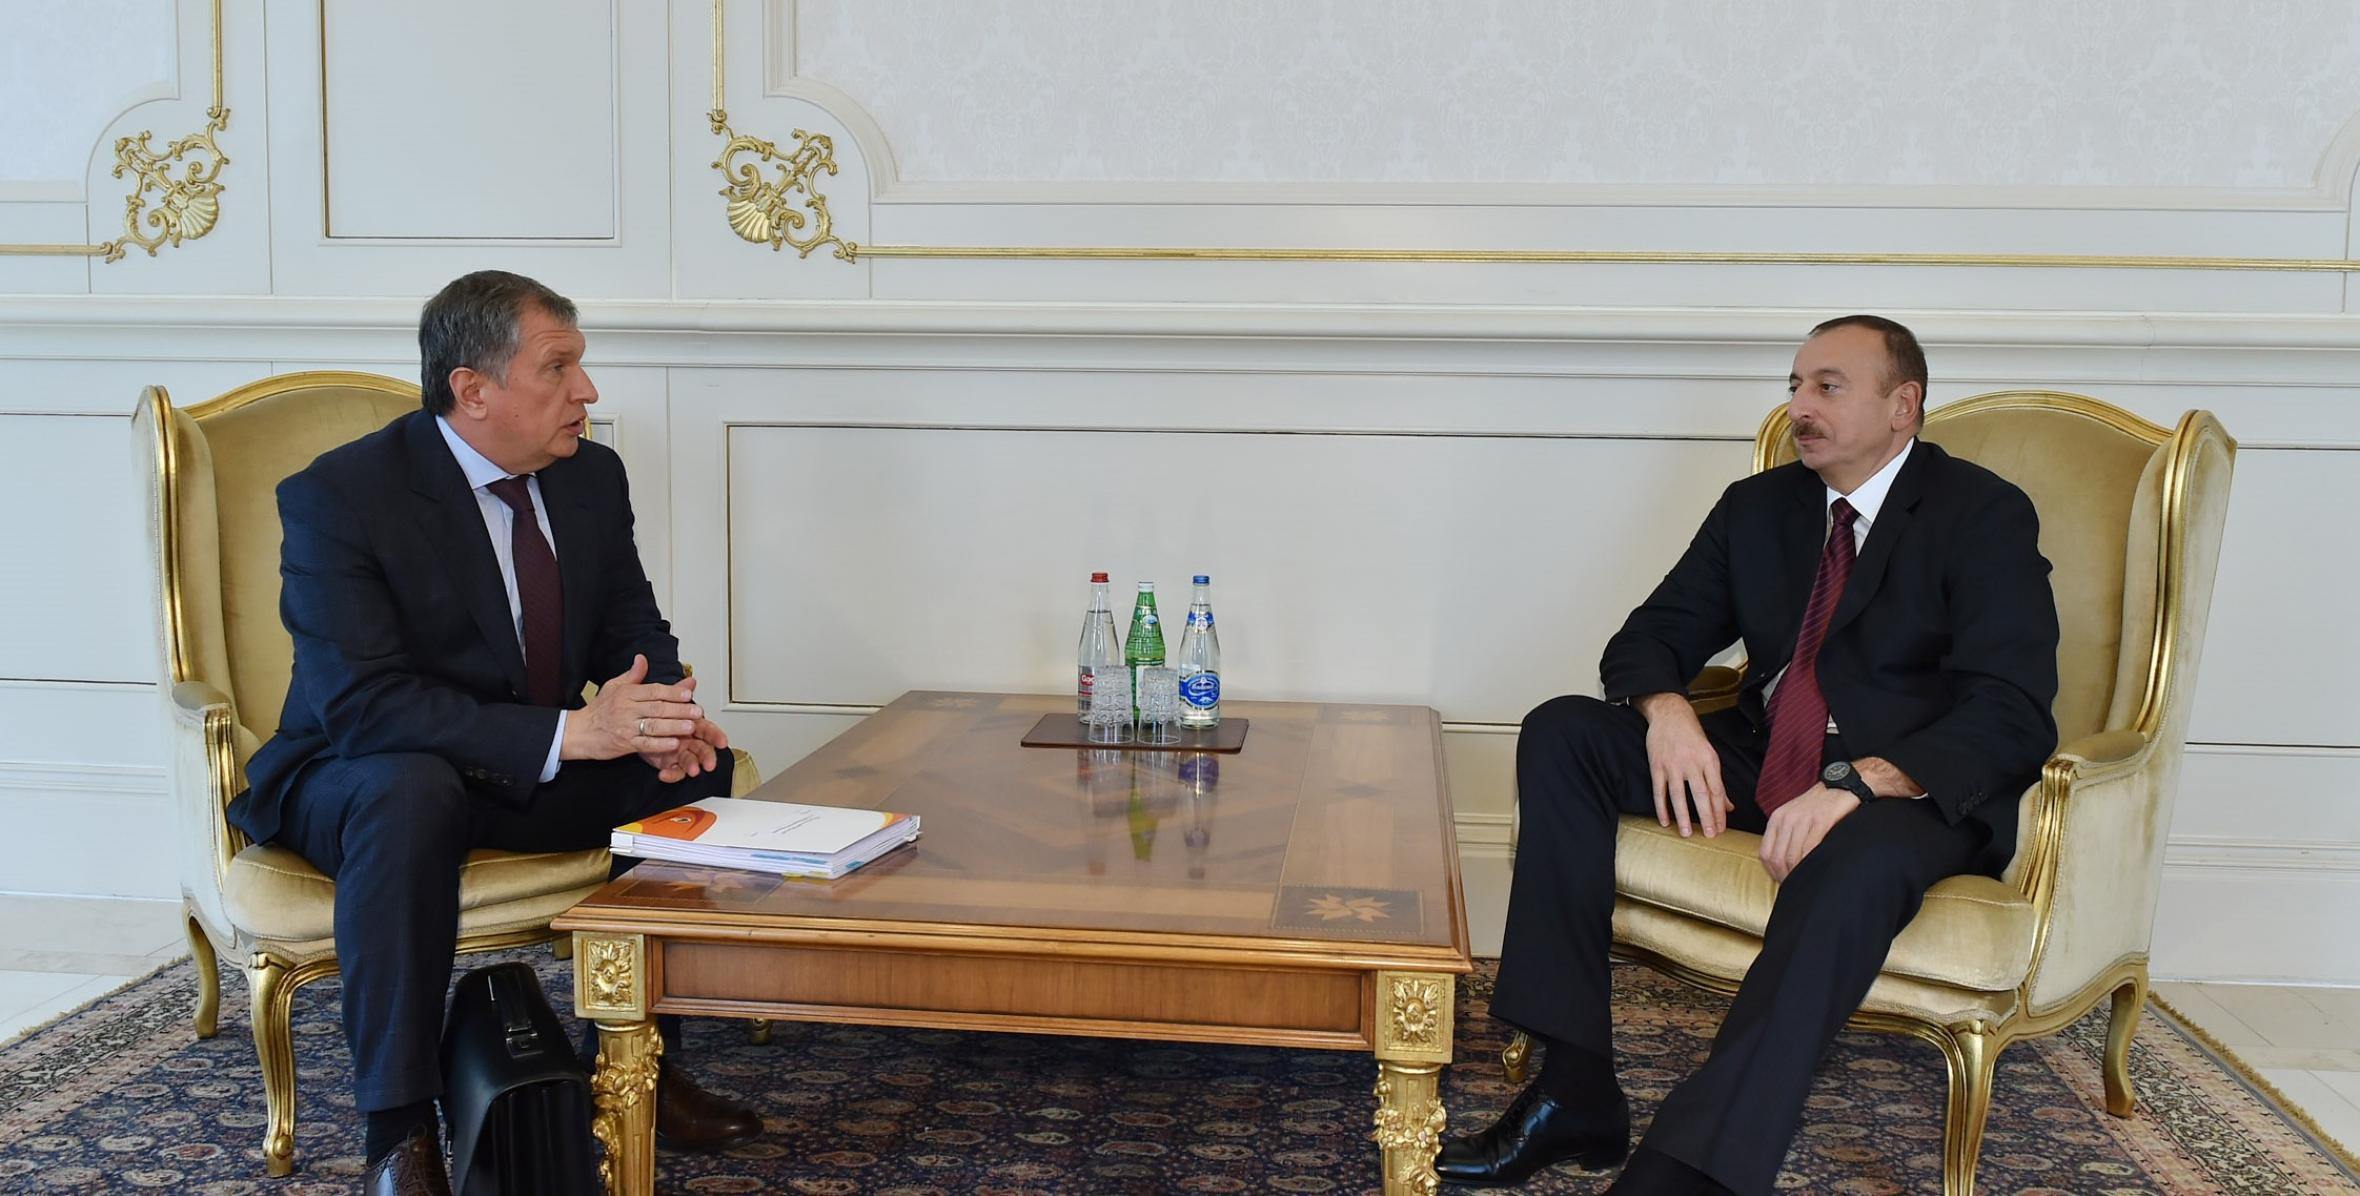 Ilham Aliyev received the President of Rosneft